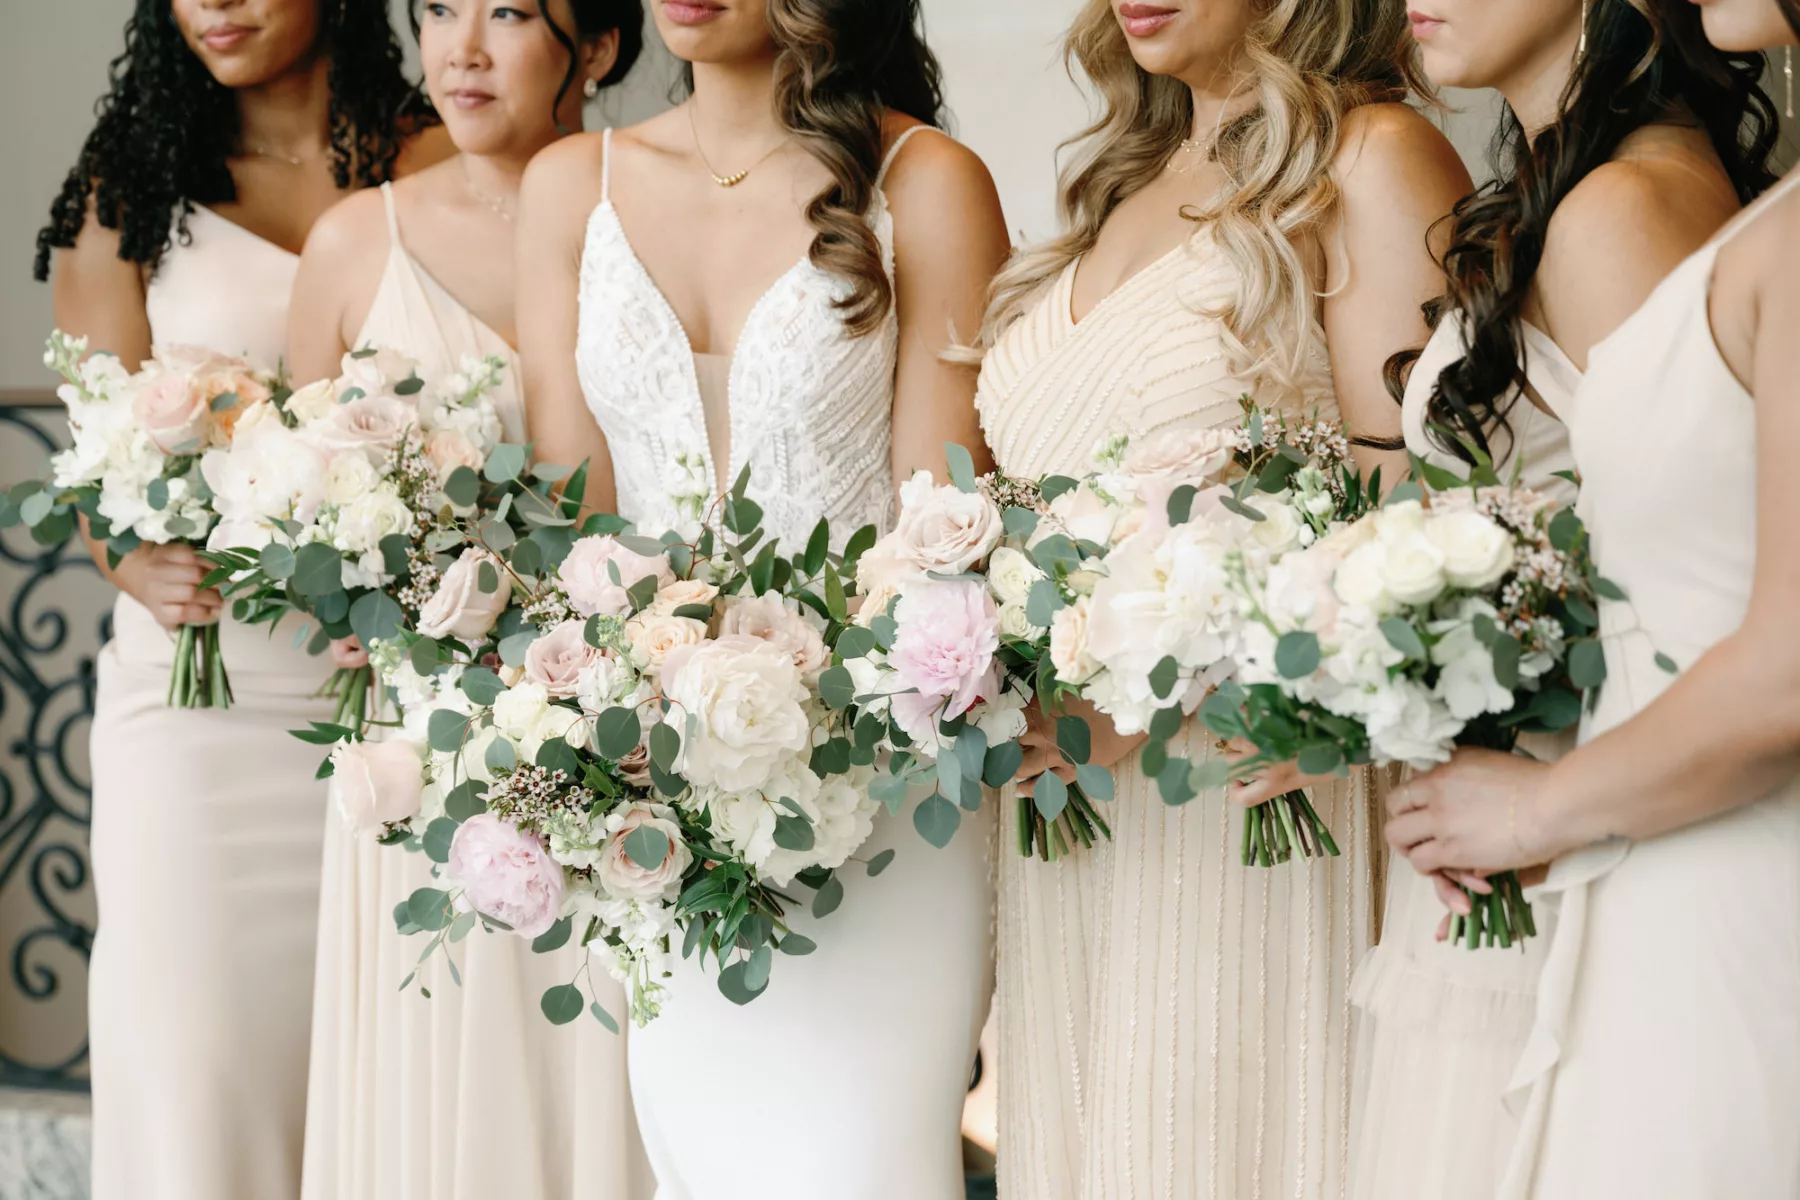 Spring Wedding Bouquet Inspiration with White Roses, Pink Garden Roses, Wax Flowers, Peony, and Greenery | Neutral Cream Mismatched Bridesmaid Dress Ideas | Tampa Bay Florist Marigold Flower Co